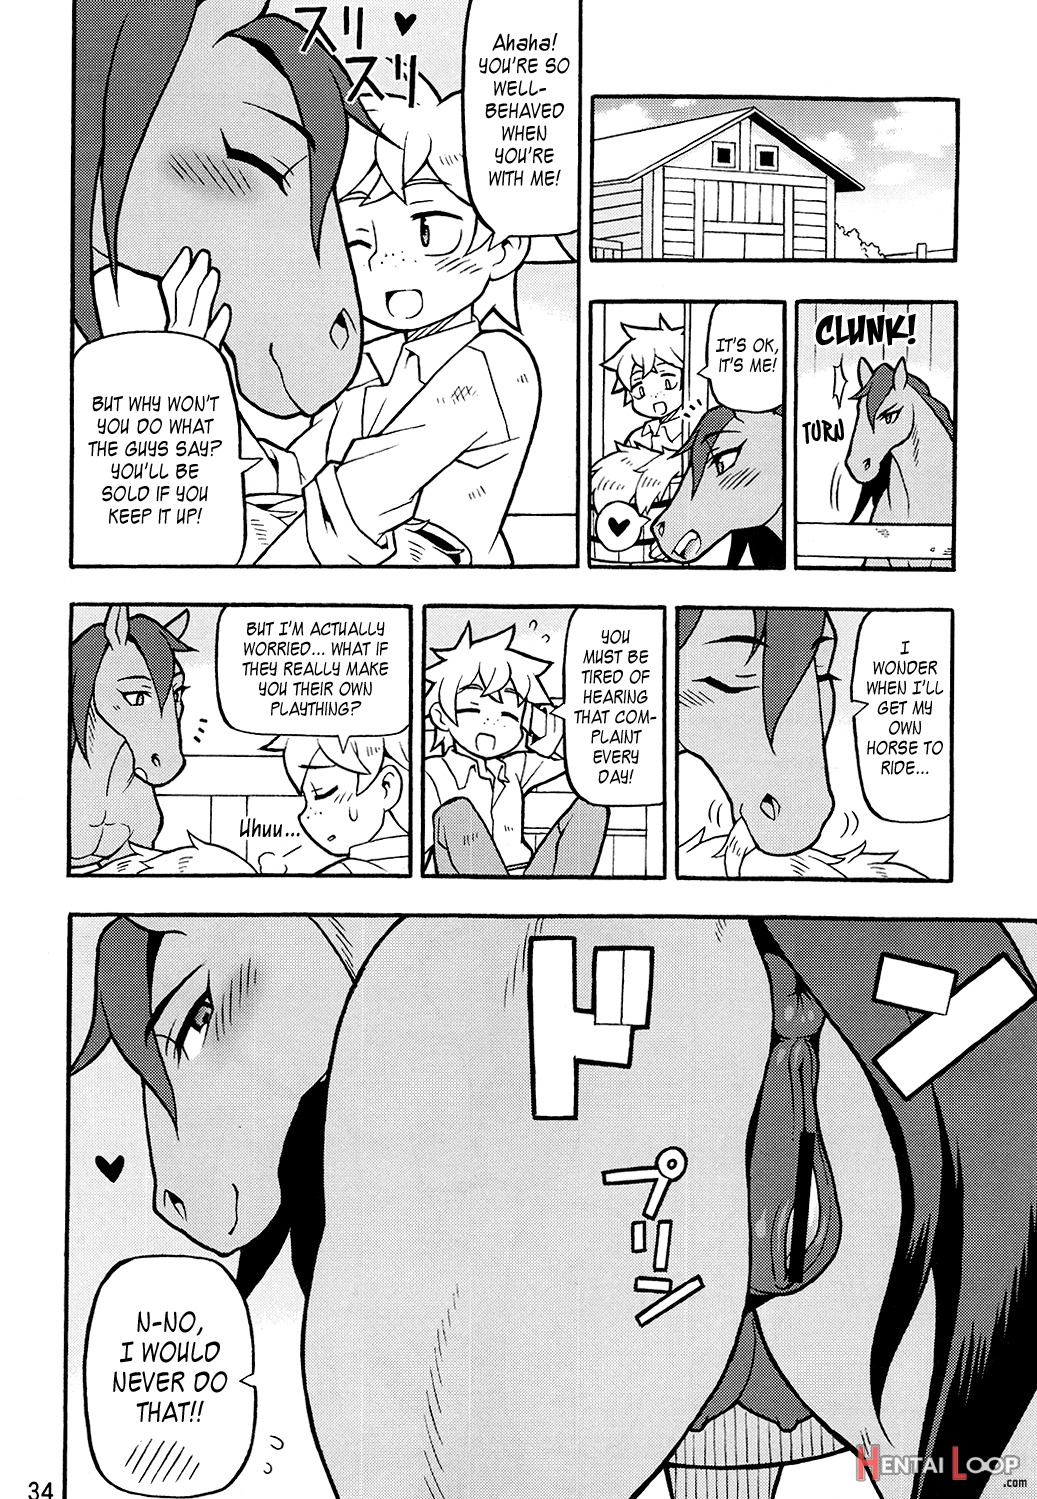 Mare Holic 4 Kemolover Ex Ch. 4, 8, 10-11, 19, 29 page 4